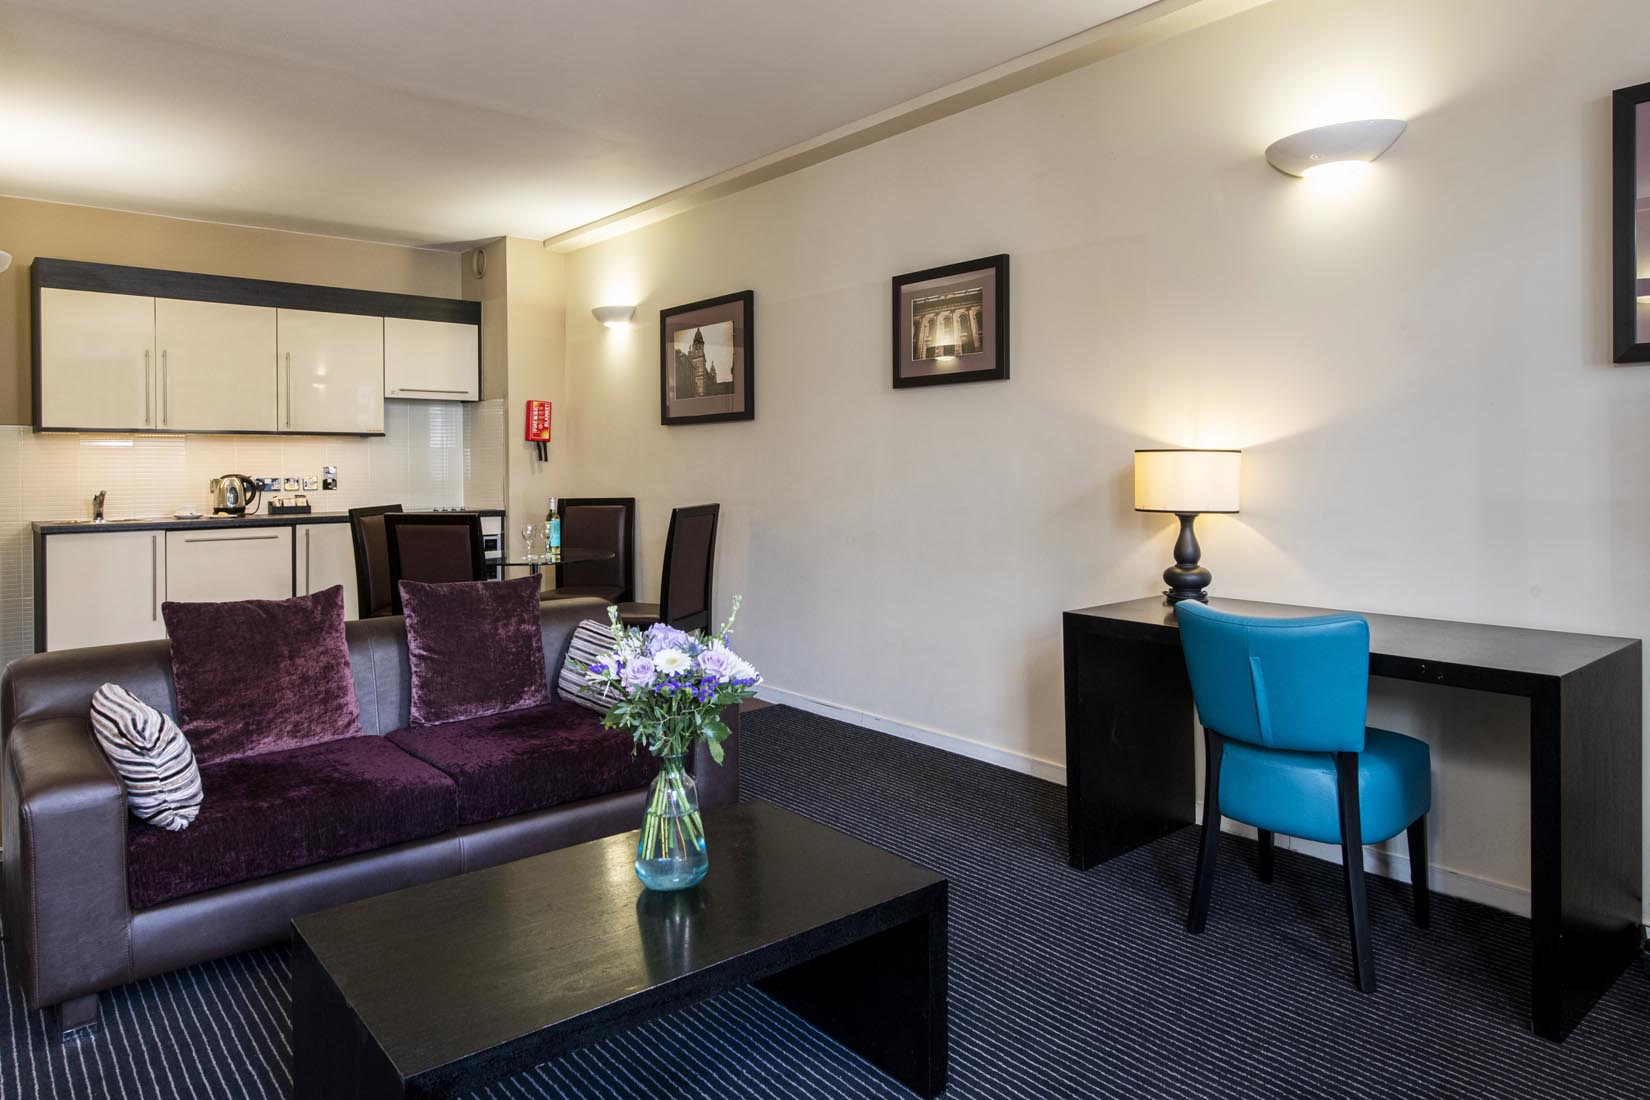 2 bedroom deluxe serviced apartments flat in Glasgow living area & kitchen & working desk